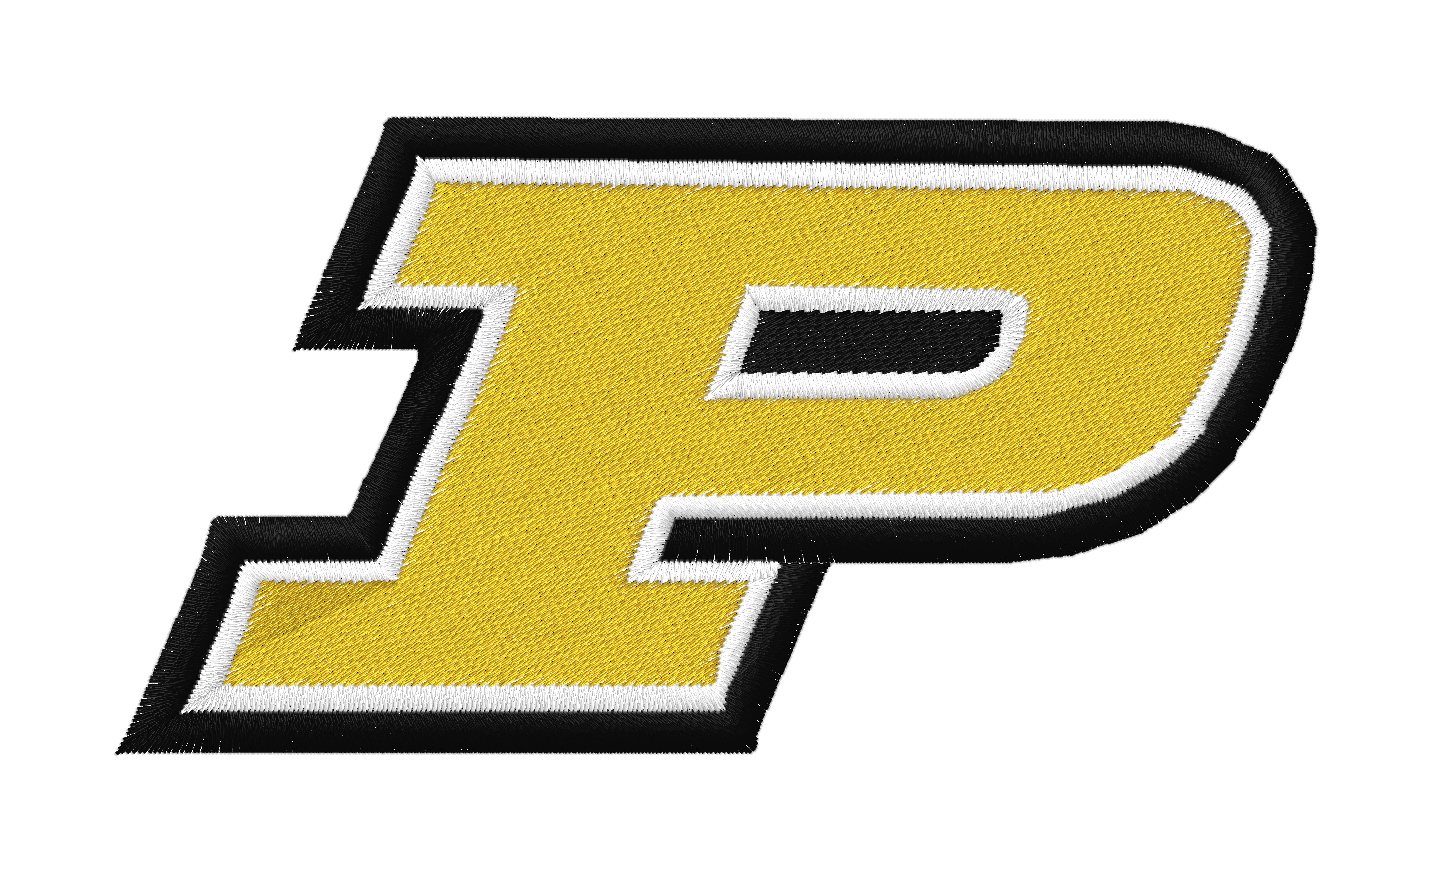 Purdue Embroidered Iron-on Patch